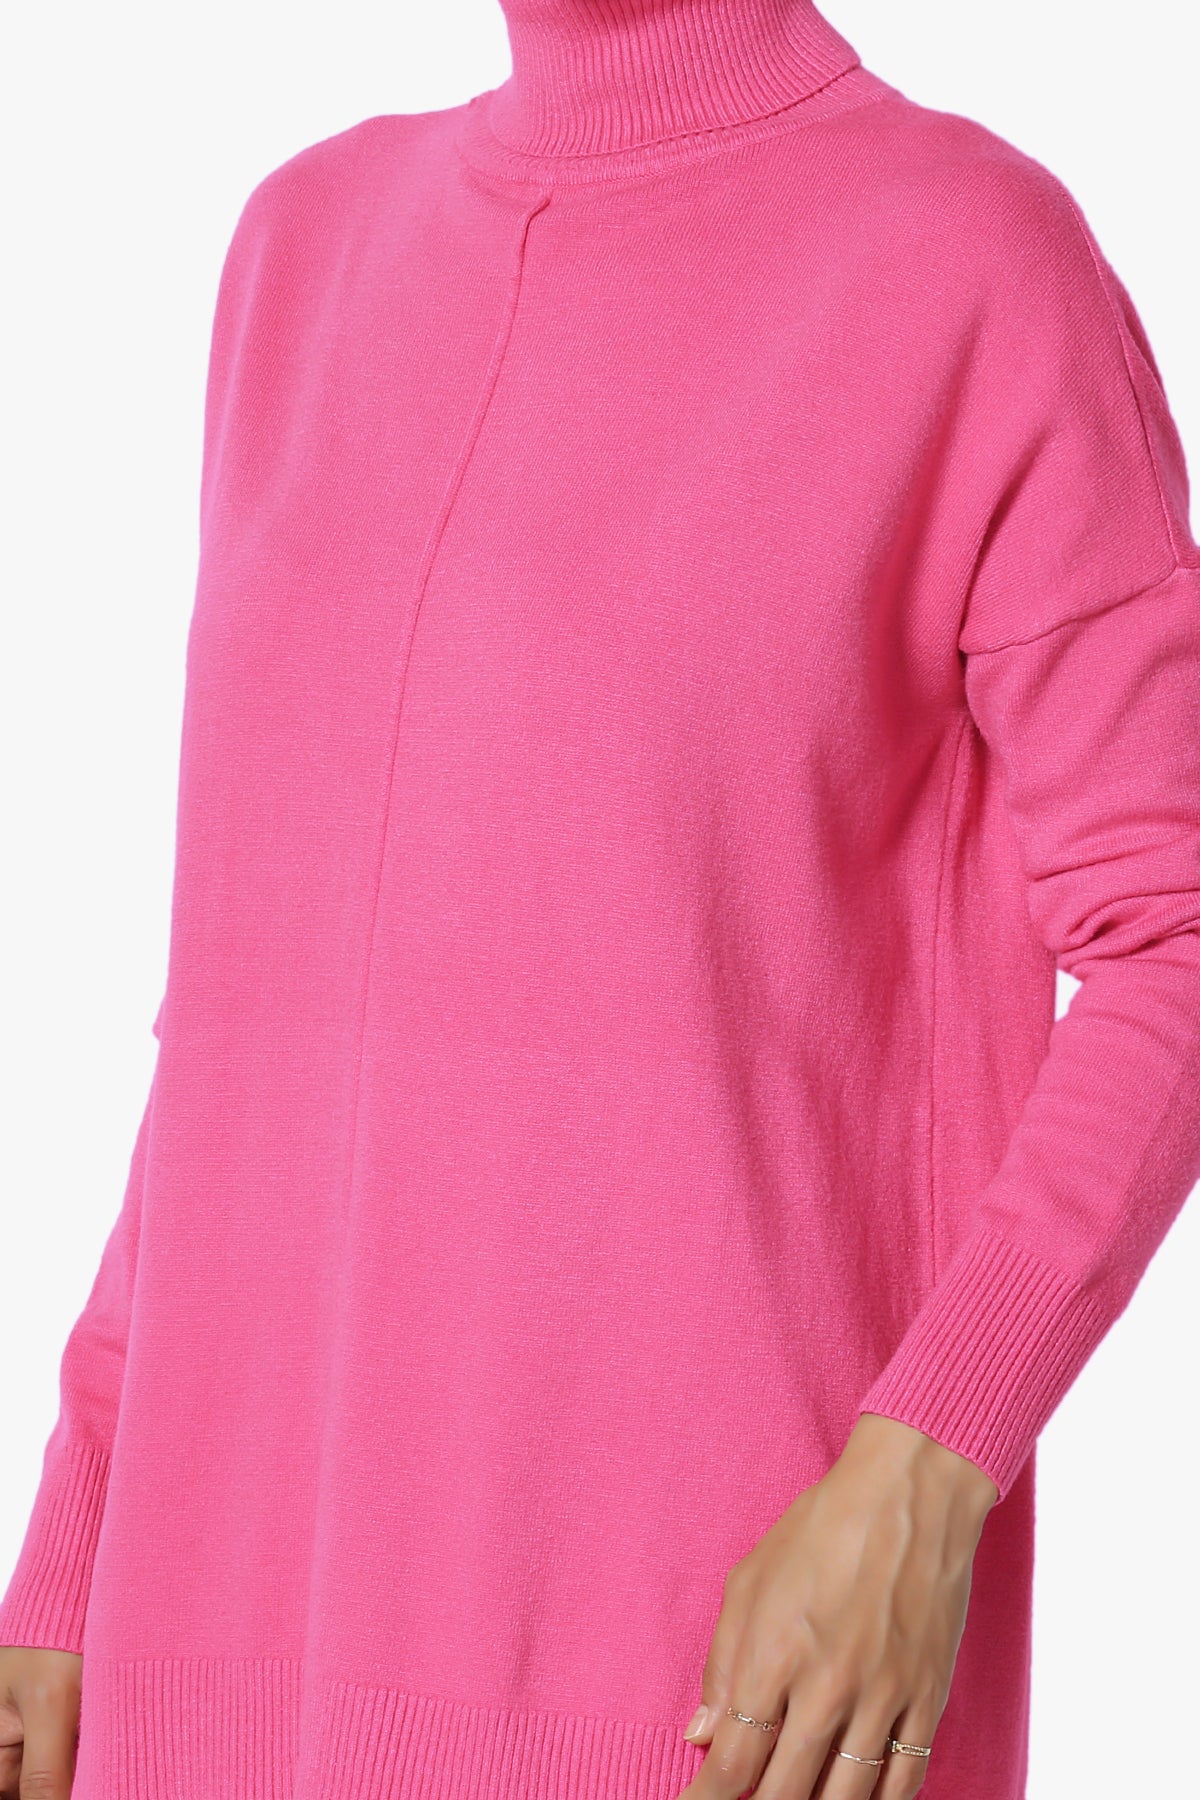 Henley Turtle Neck Knit Sweater HOT PINK_5